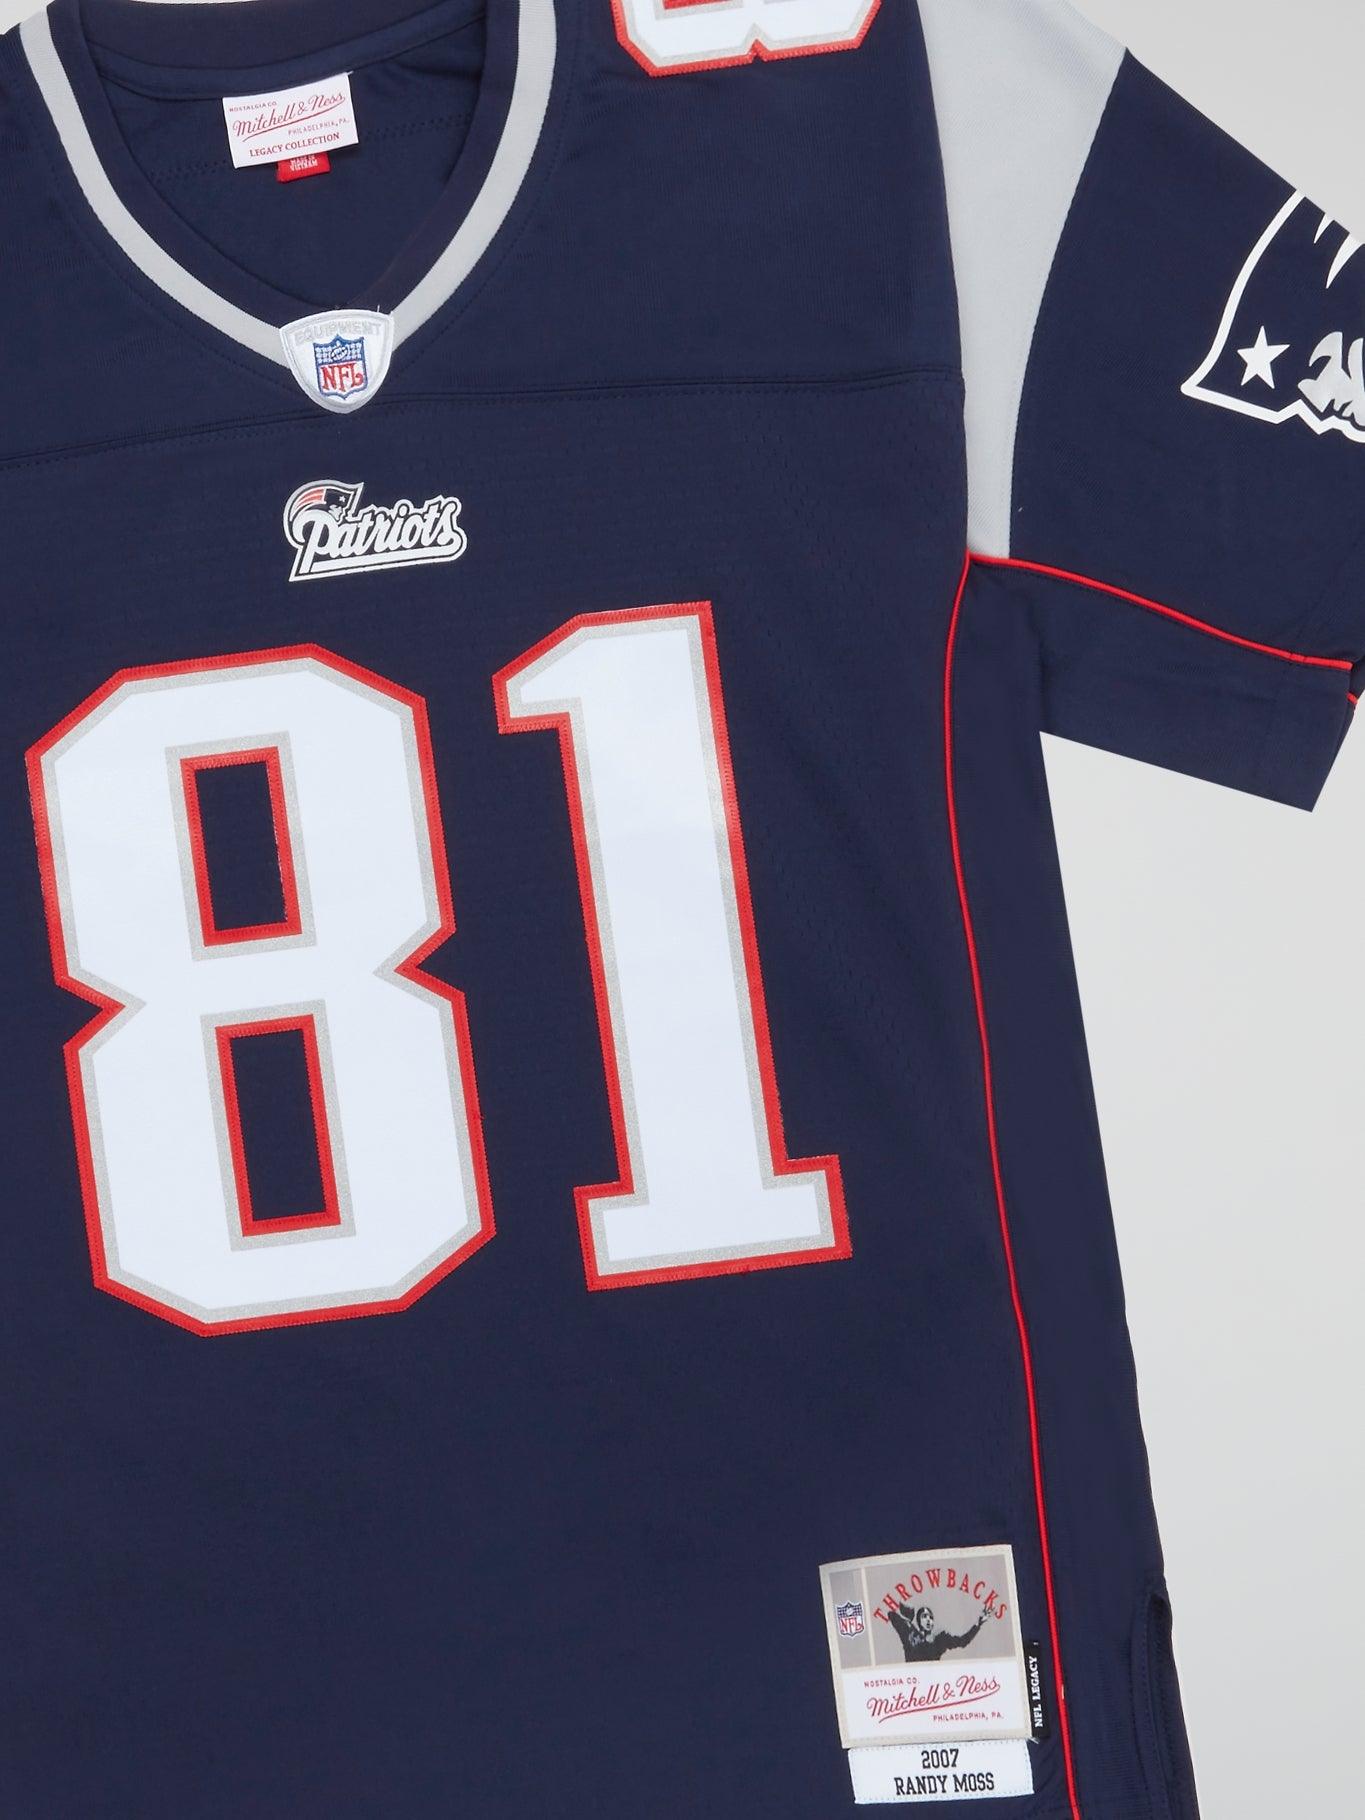 Mitchell and Ness - NFL Legacy Jersey Patriots 07 Randy Moss